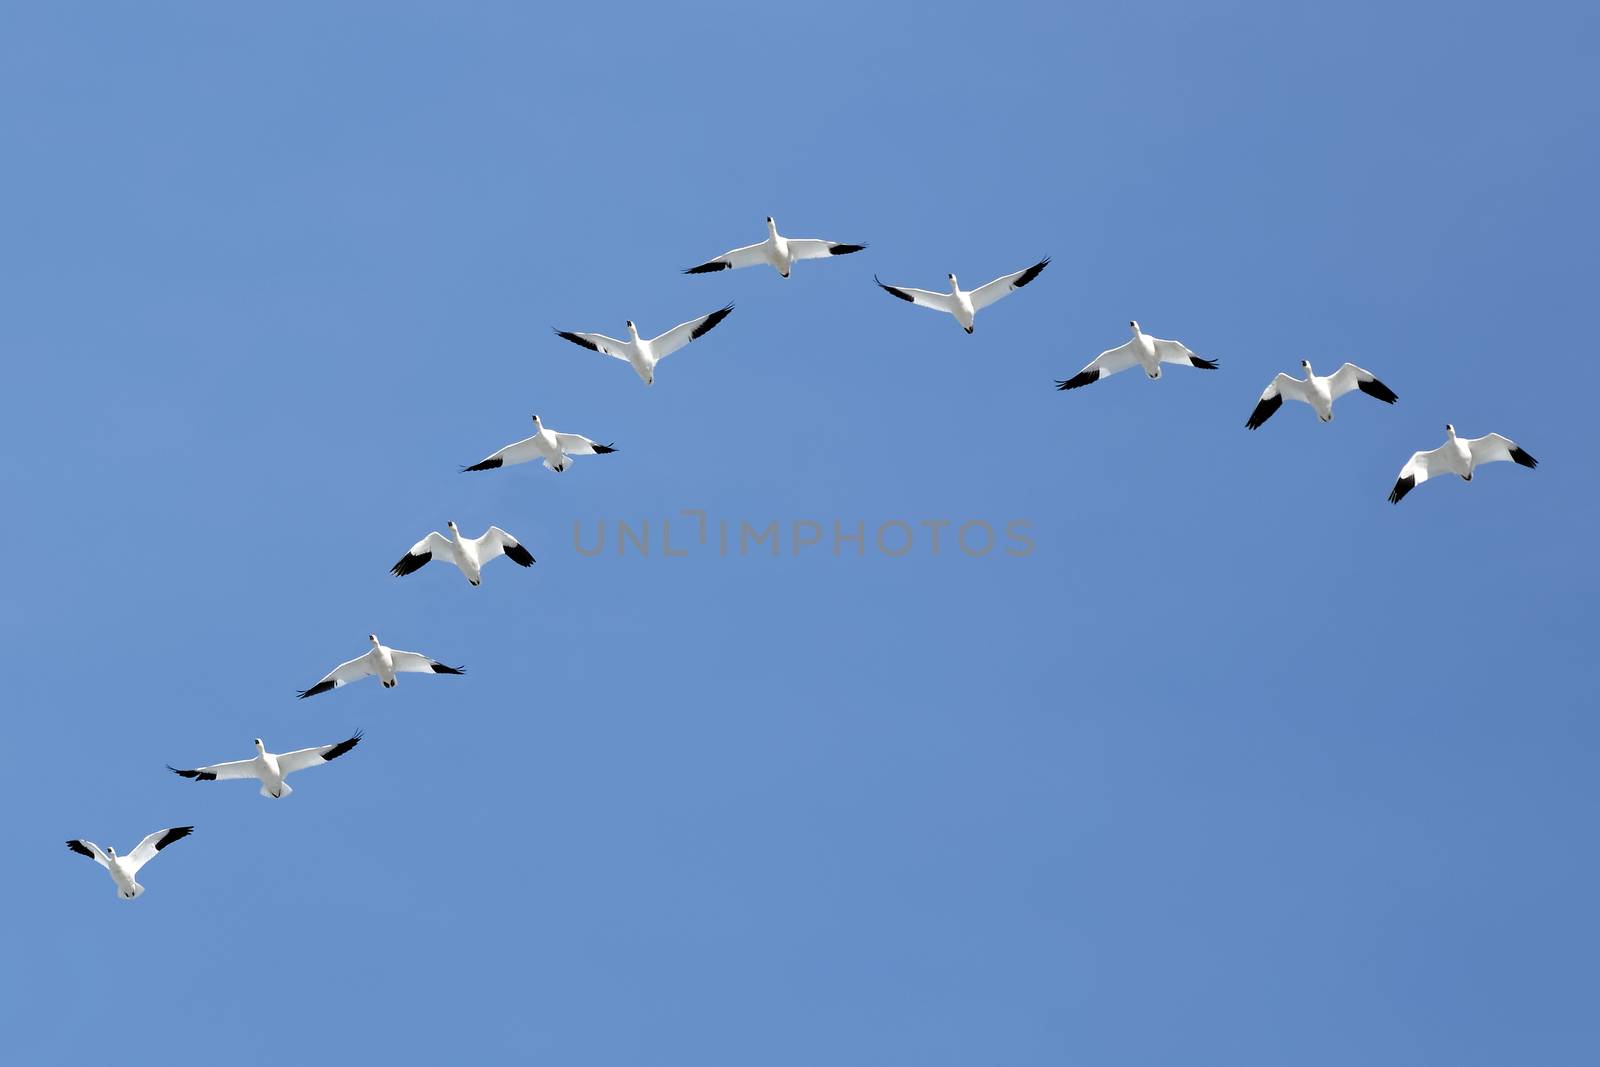 Migrating Snow Geese Flying in V Formation by DelmasLehman